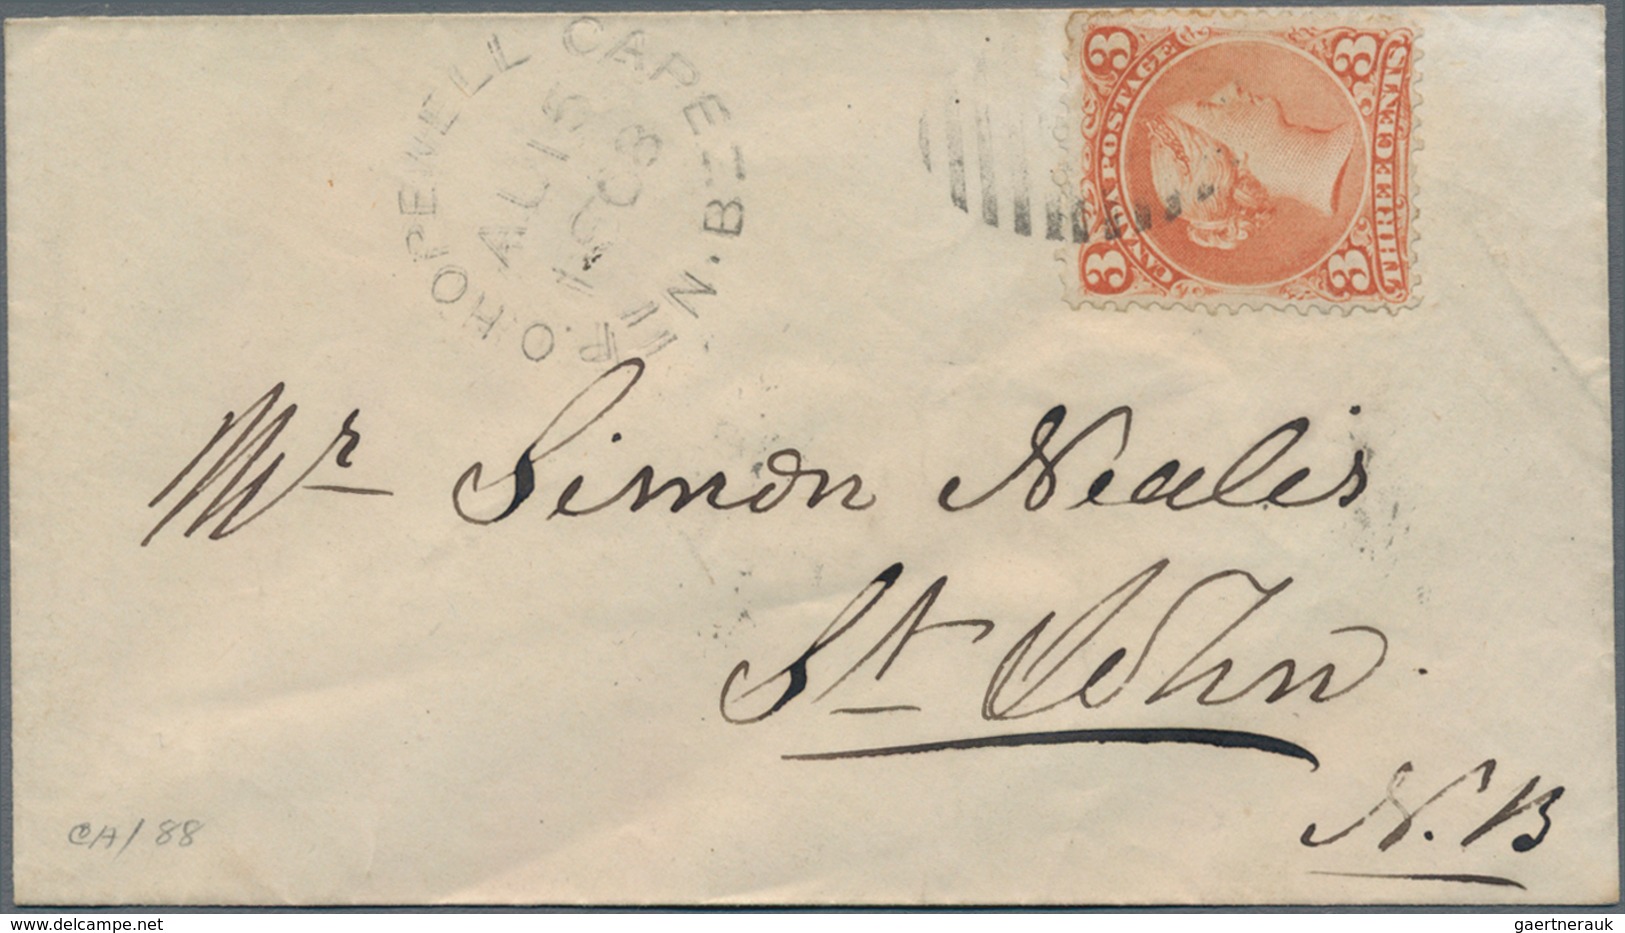 Canada: 1868/69, six very fine covers, each franked with 3 Cent QV large type.